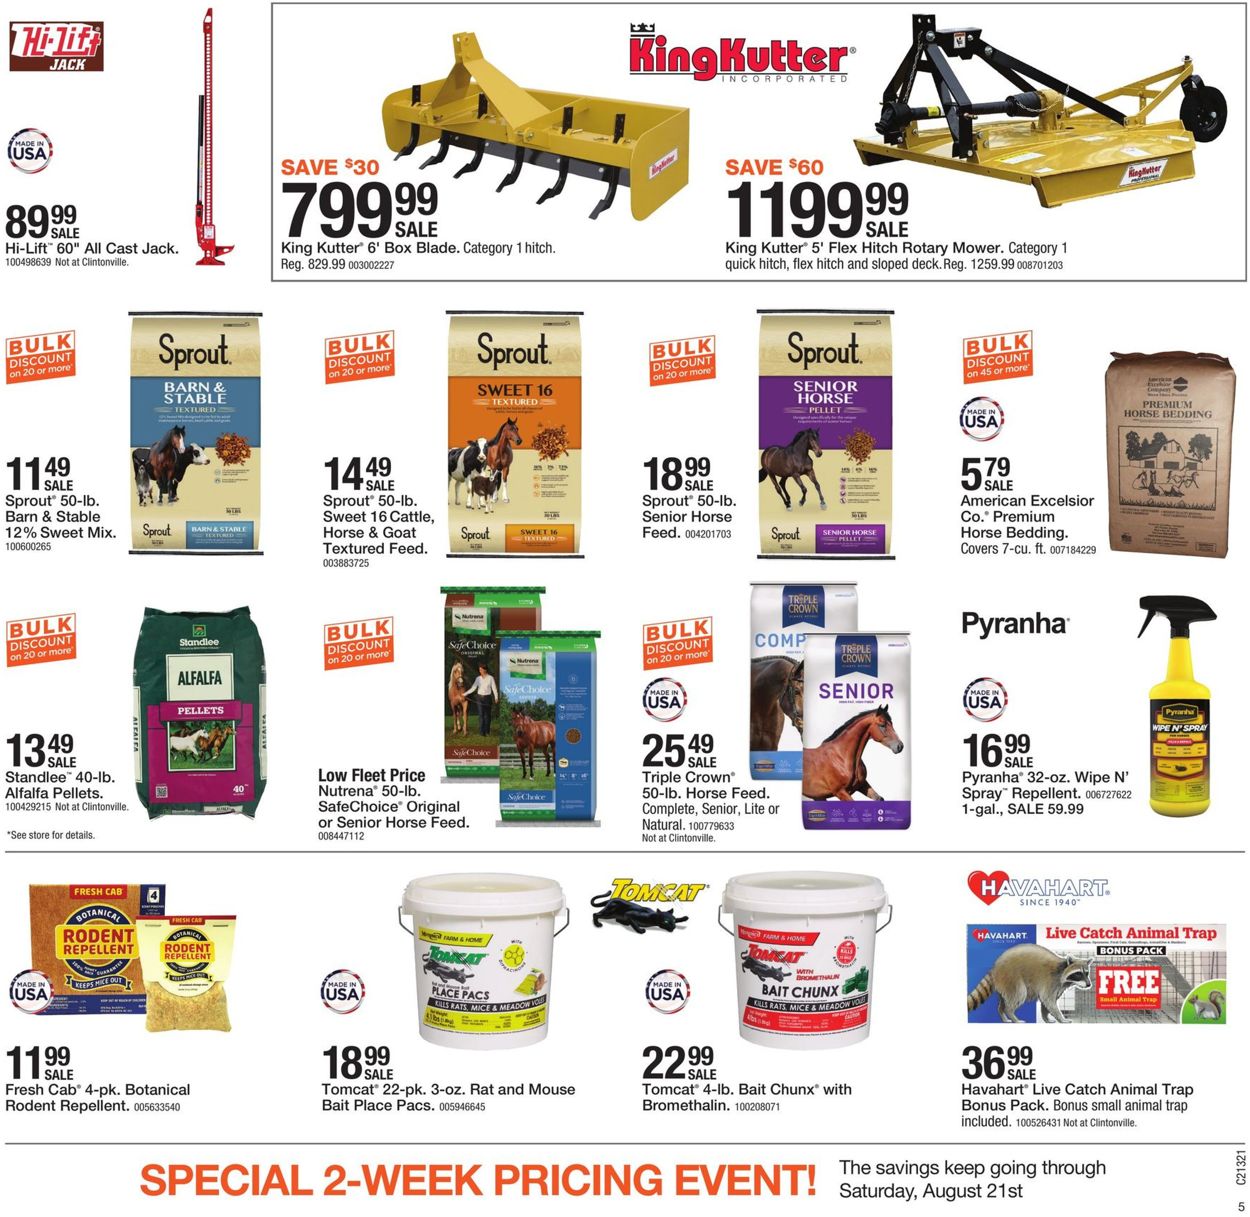 Mills Fleet Farm Current weekly ad 08/06 - 08/21/2021 [5] - frequent ...